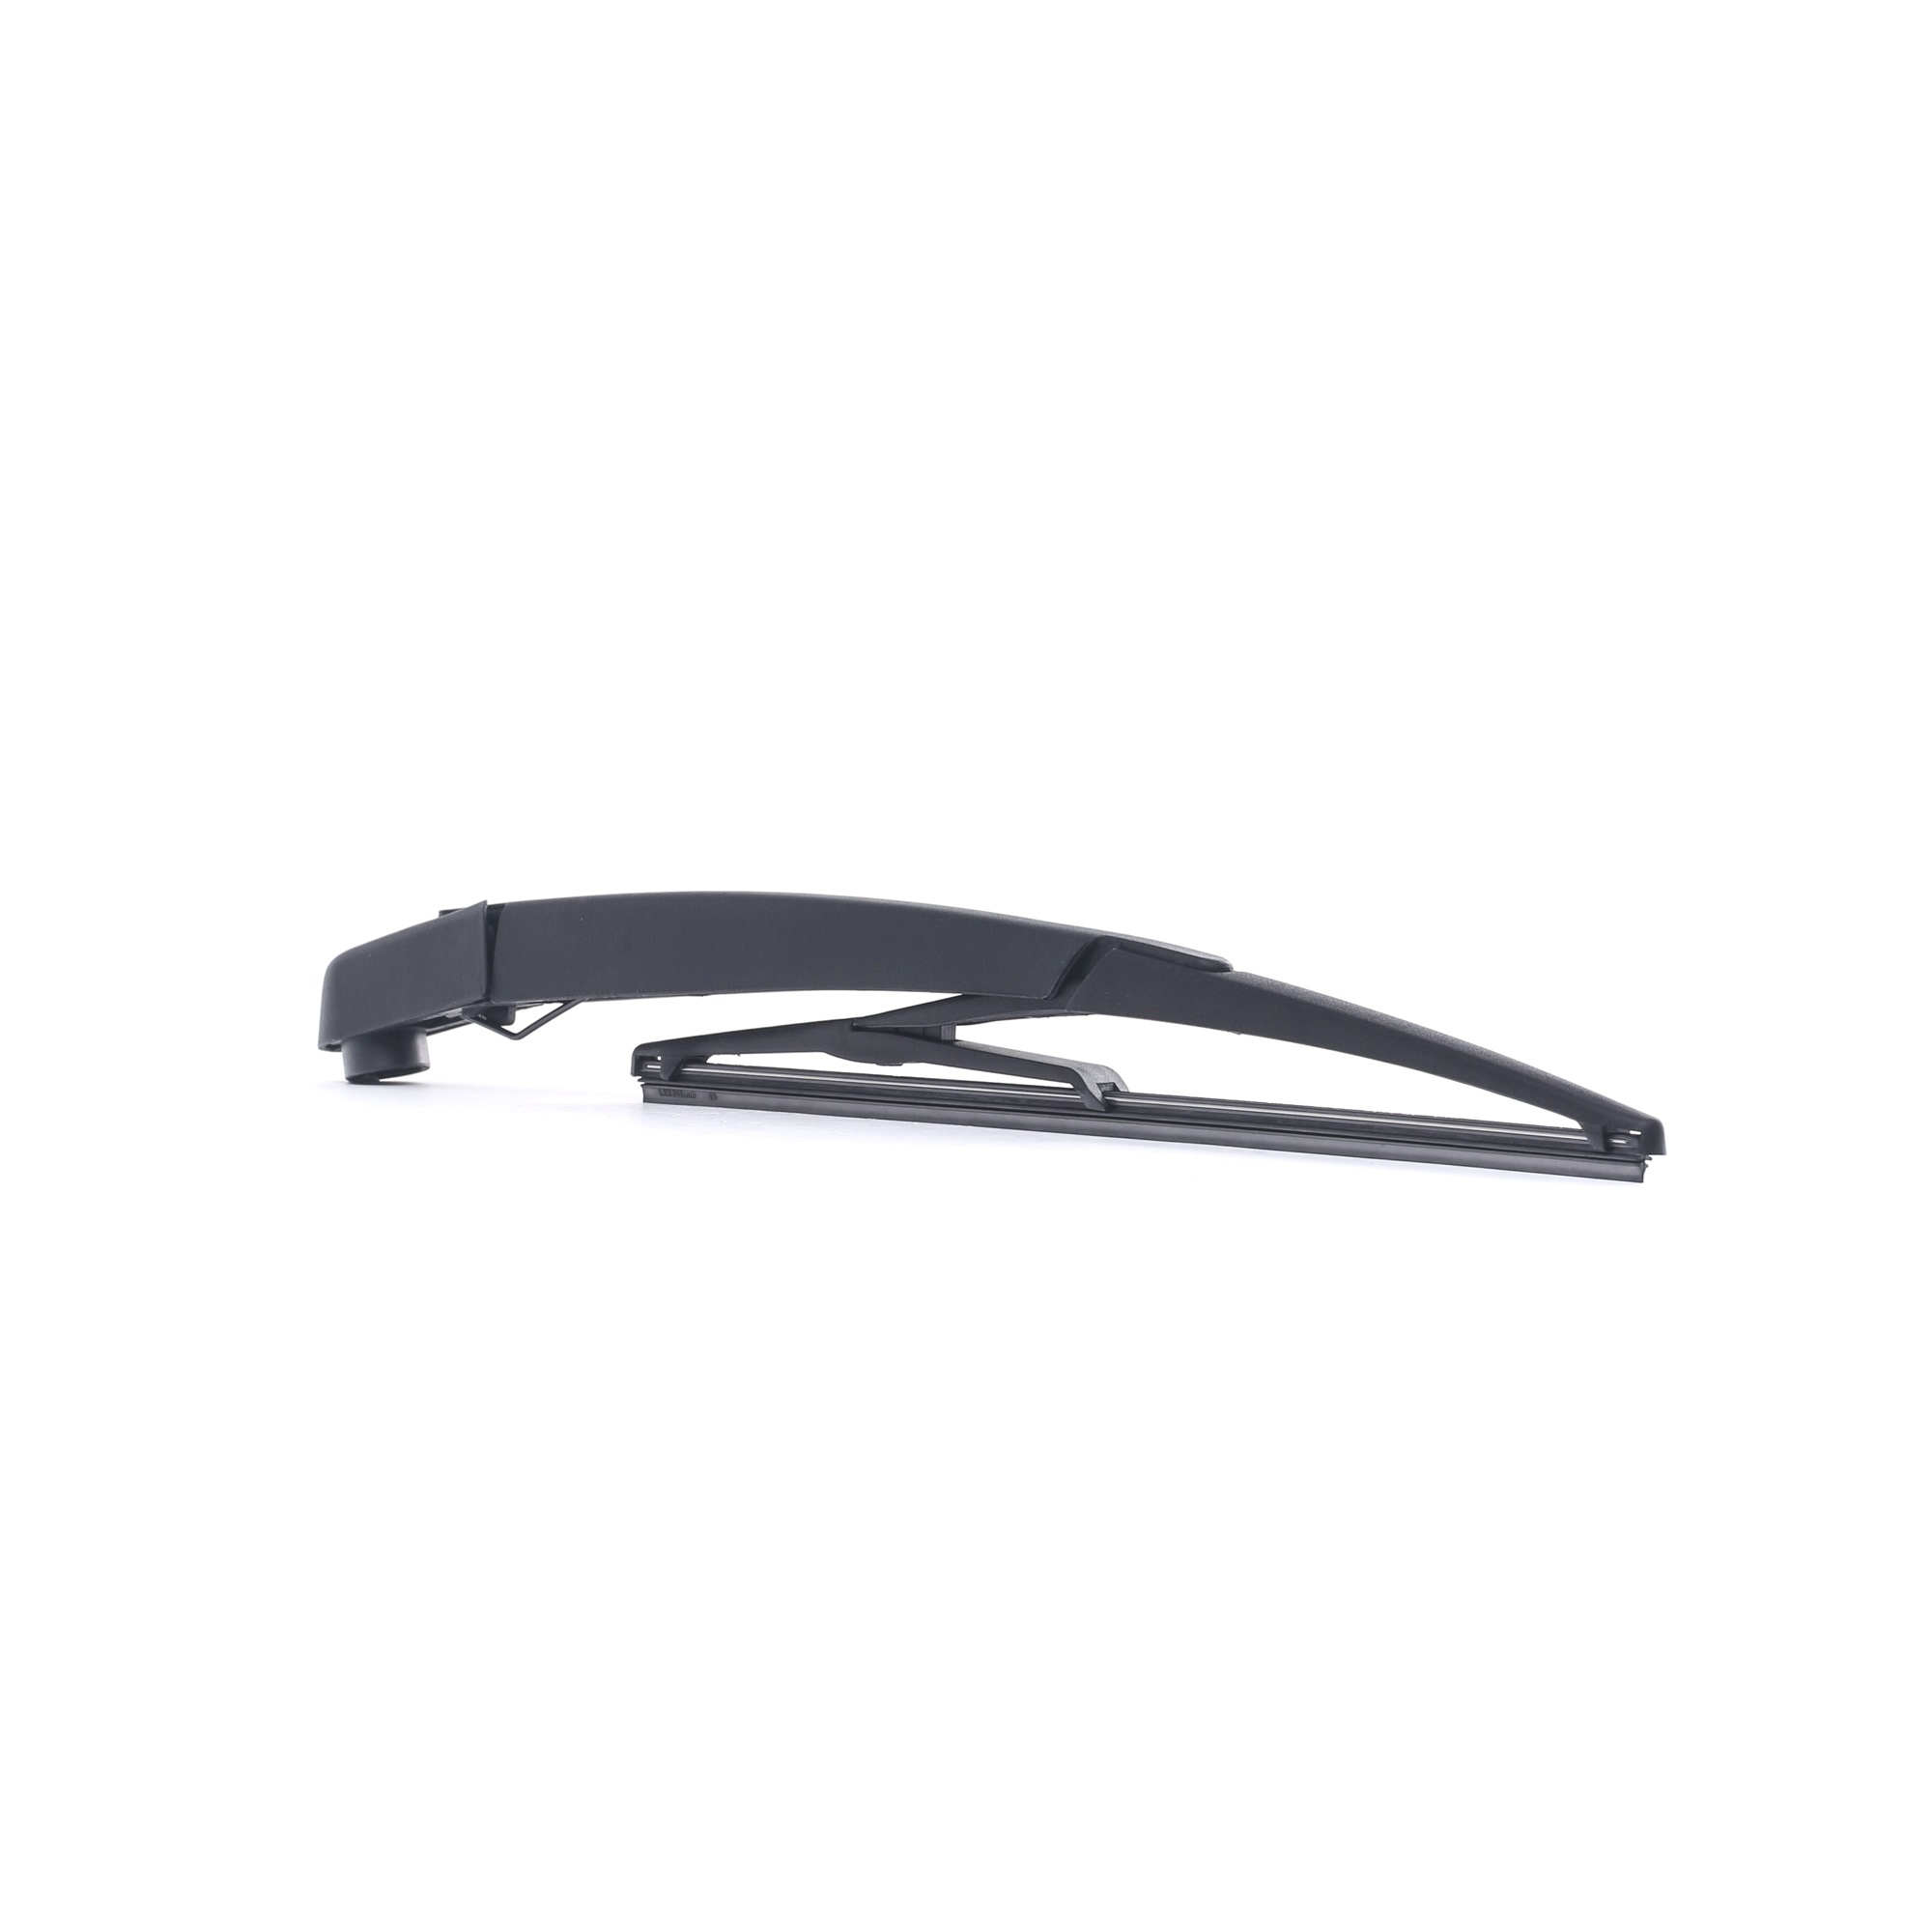 METZGER 2190190 Wiper Arm, windscreen washer Rear, with integrated wiper blade, with cap